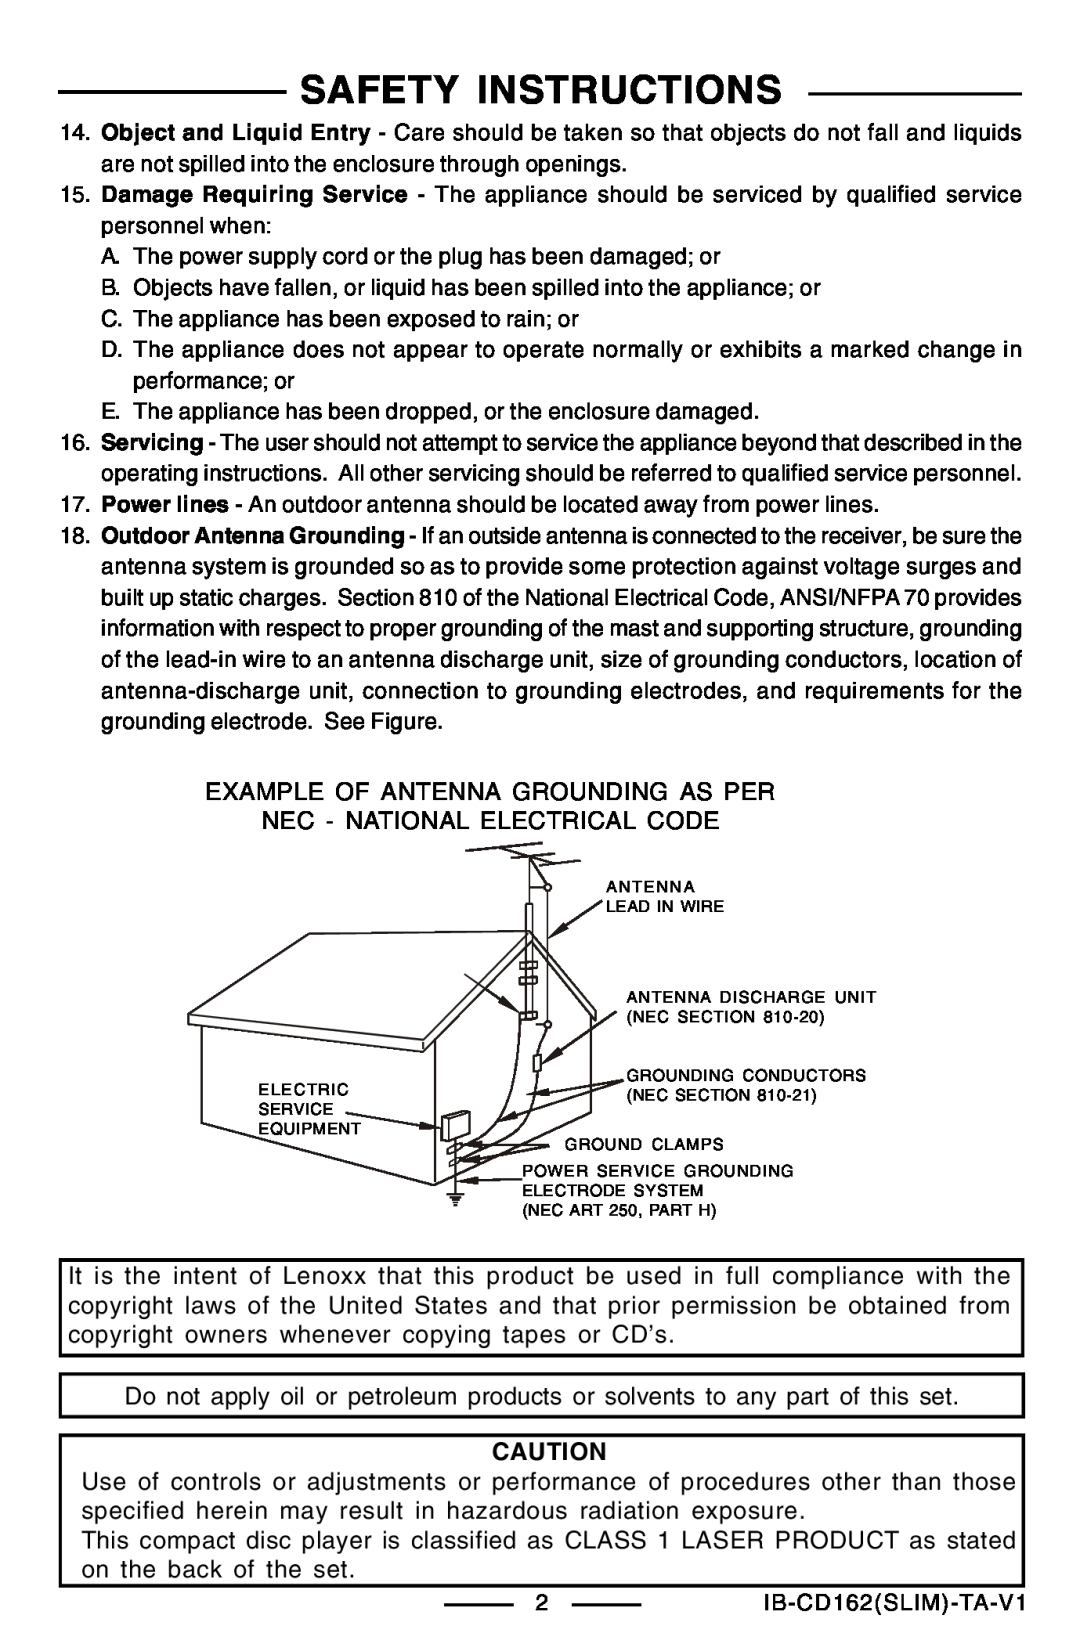 Lenoxx Electronics CD-162 operating instructions Safety Instructions, Example Of Antenna Grounding As Per 